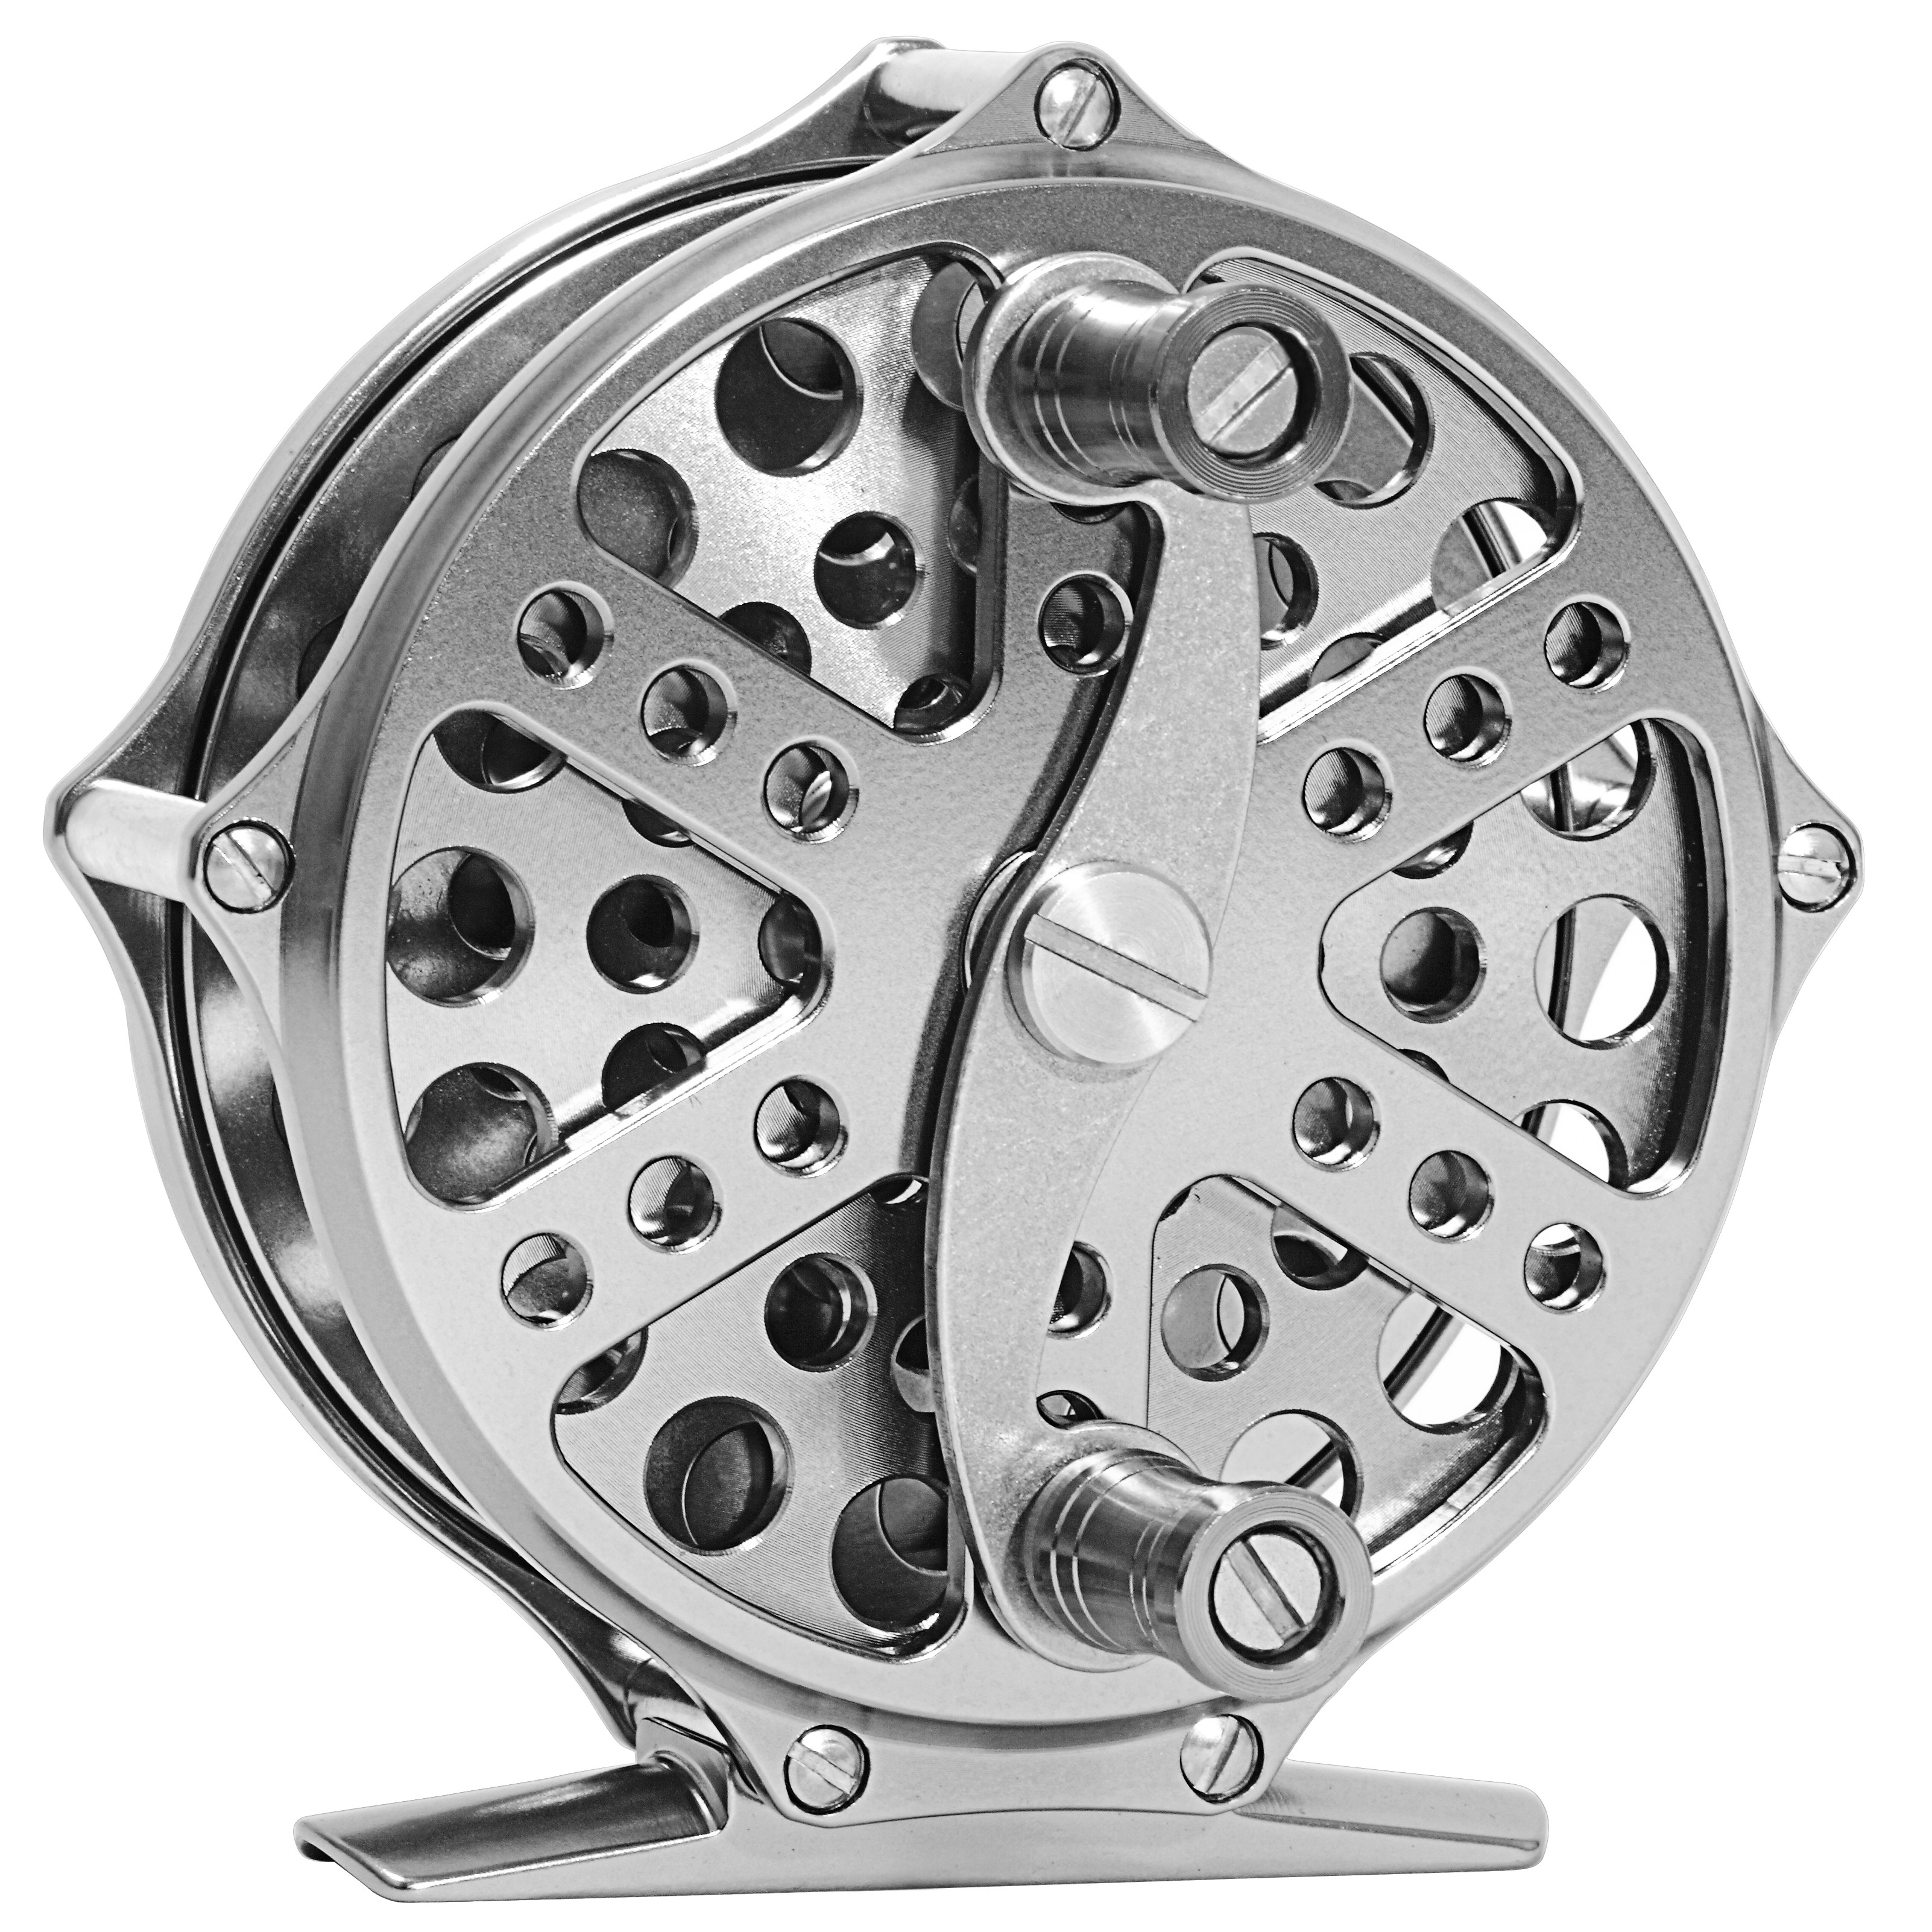 Experience the Ultimate Nymph Fishing with the Automatic Fly Fishing Reel!